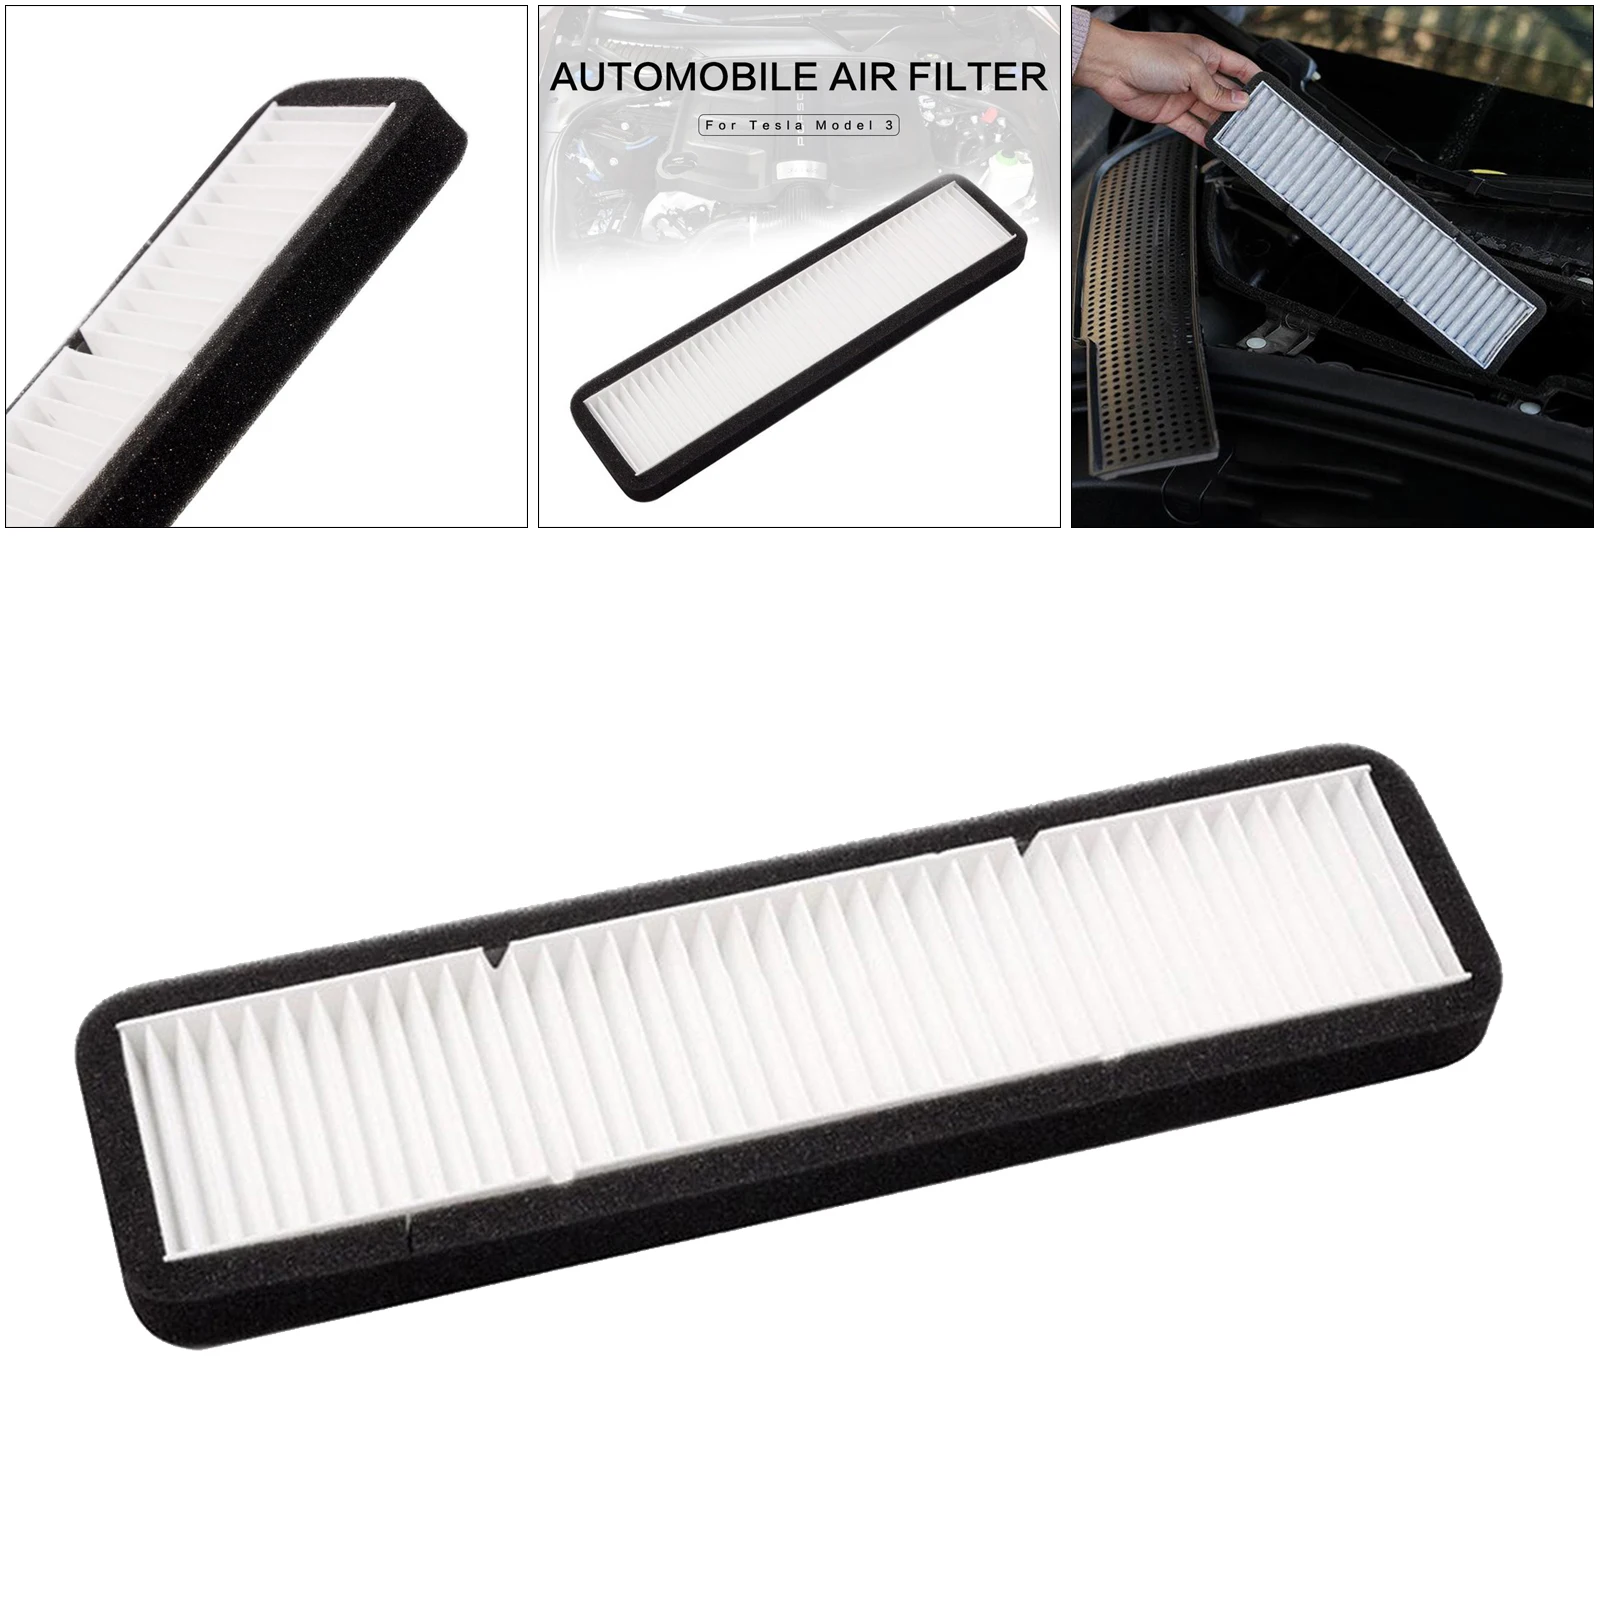 Air Conditioning Filter Replacement Effective Blocking PM2.5 Direct for Tesla Model 3 Y 2019 2020 2021 Cars Accessories